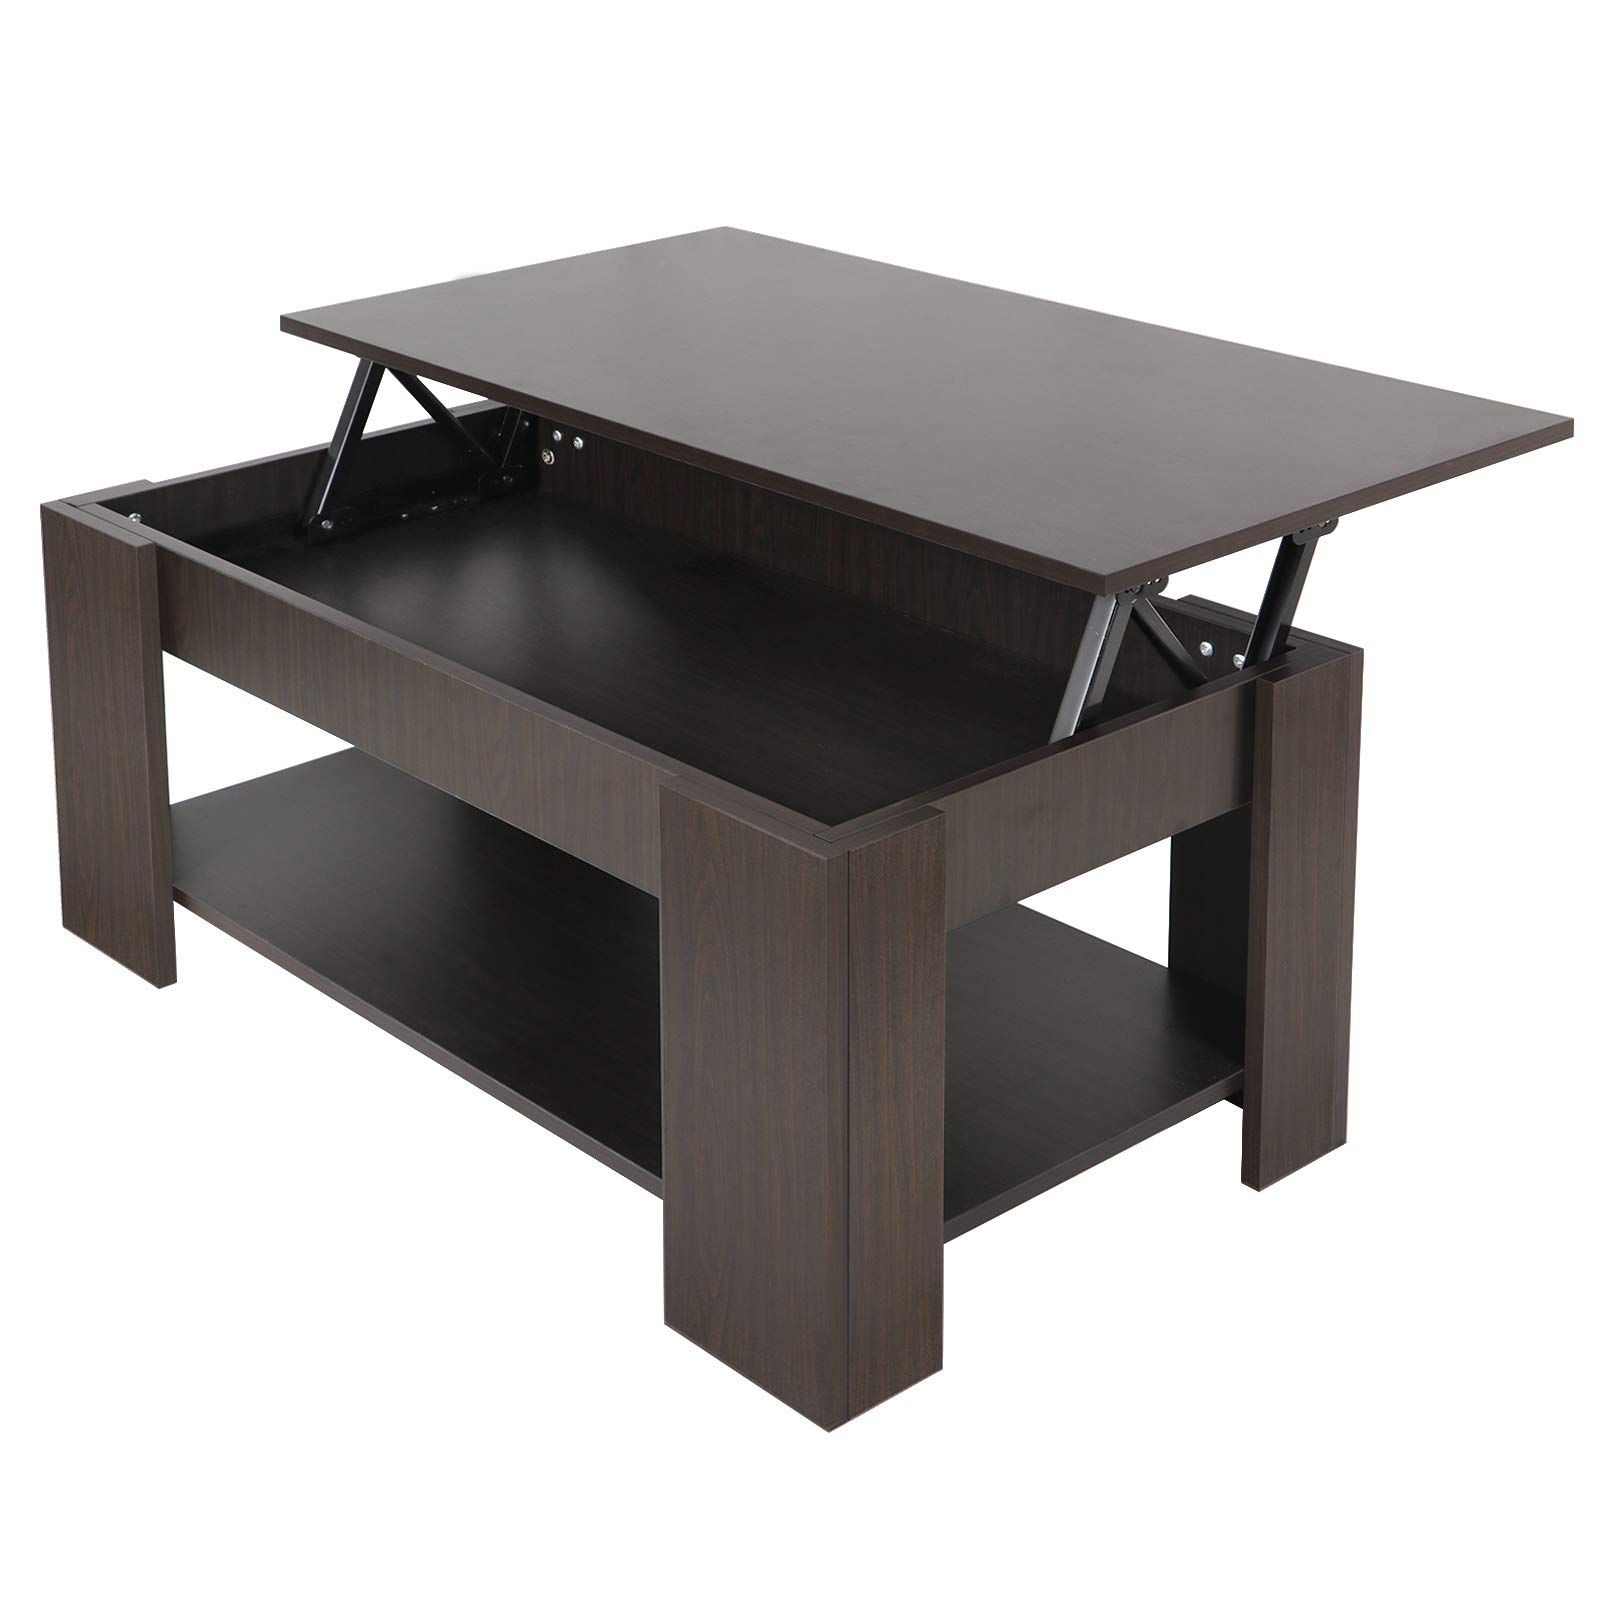 Zeny Lift Top Coffee Table With Hidden Compartment And Storage Shelves For Most Recent Modern Coffee Tables With Hidden Storage Compartments (View 12 of 15)